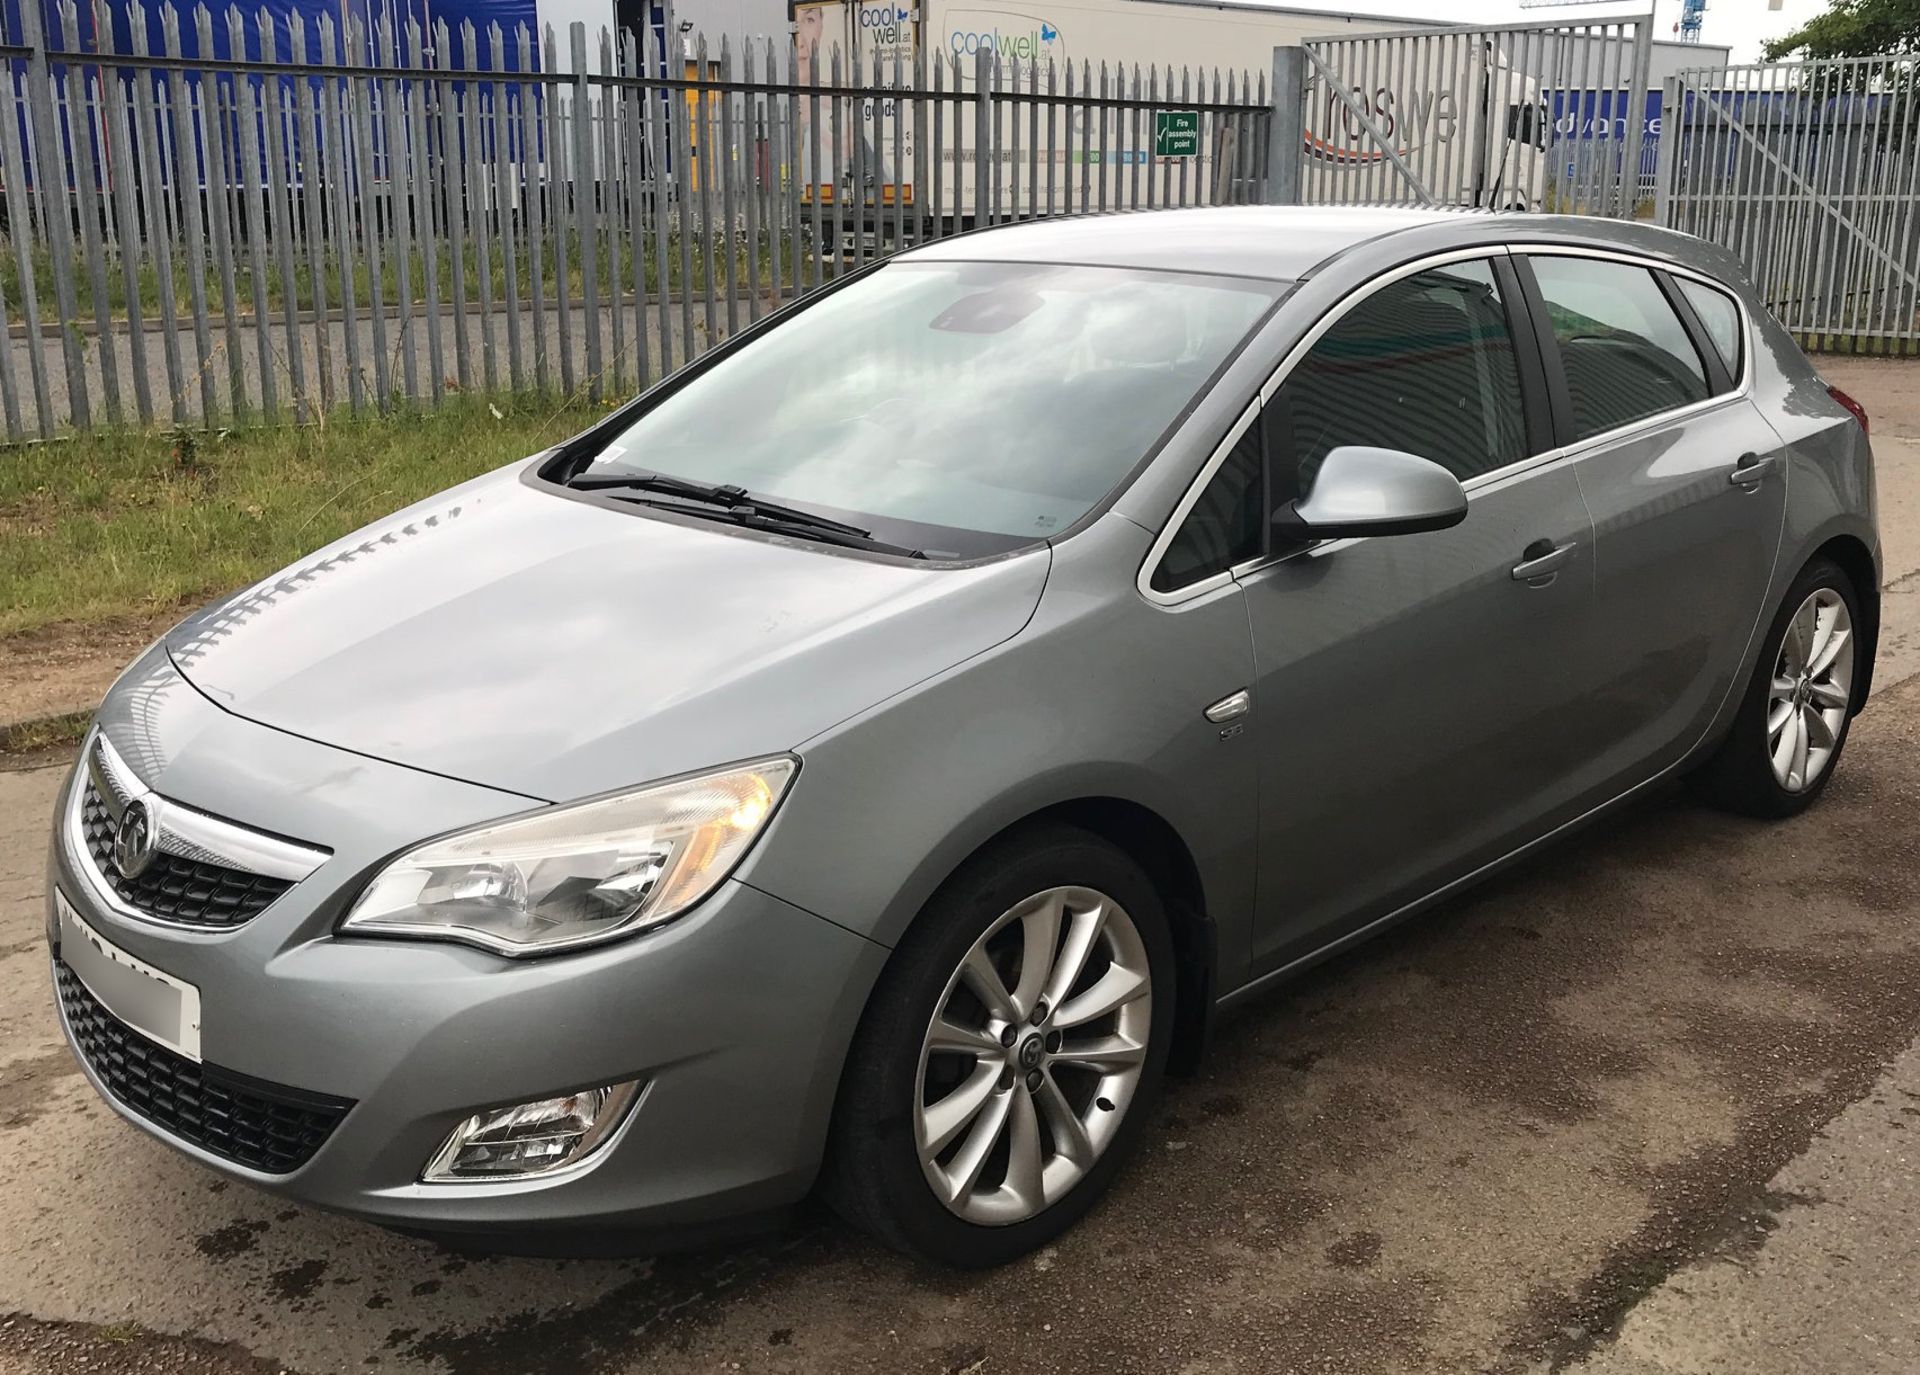 2010 Vauxhall Astra 1.6 SE 5Dr Hatchback - CL505 - NO VAT ON THE HAMMER - Location: Corby, - Image 2 of 11